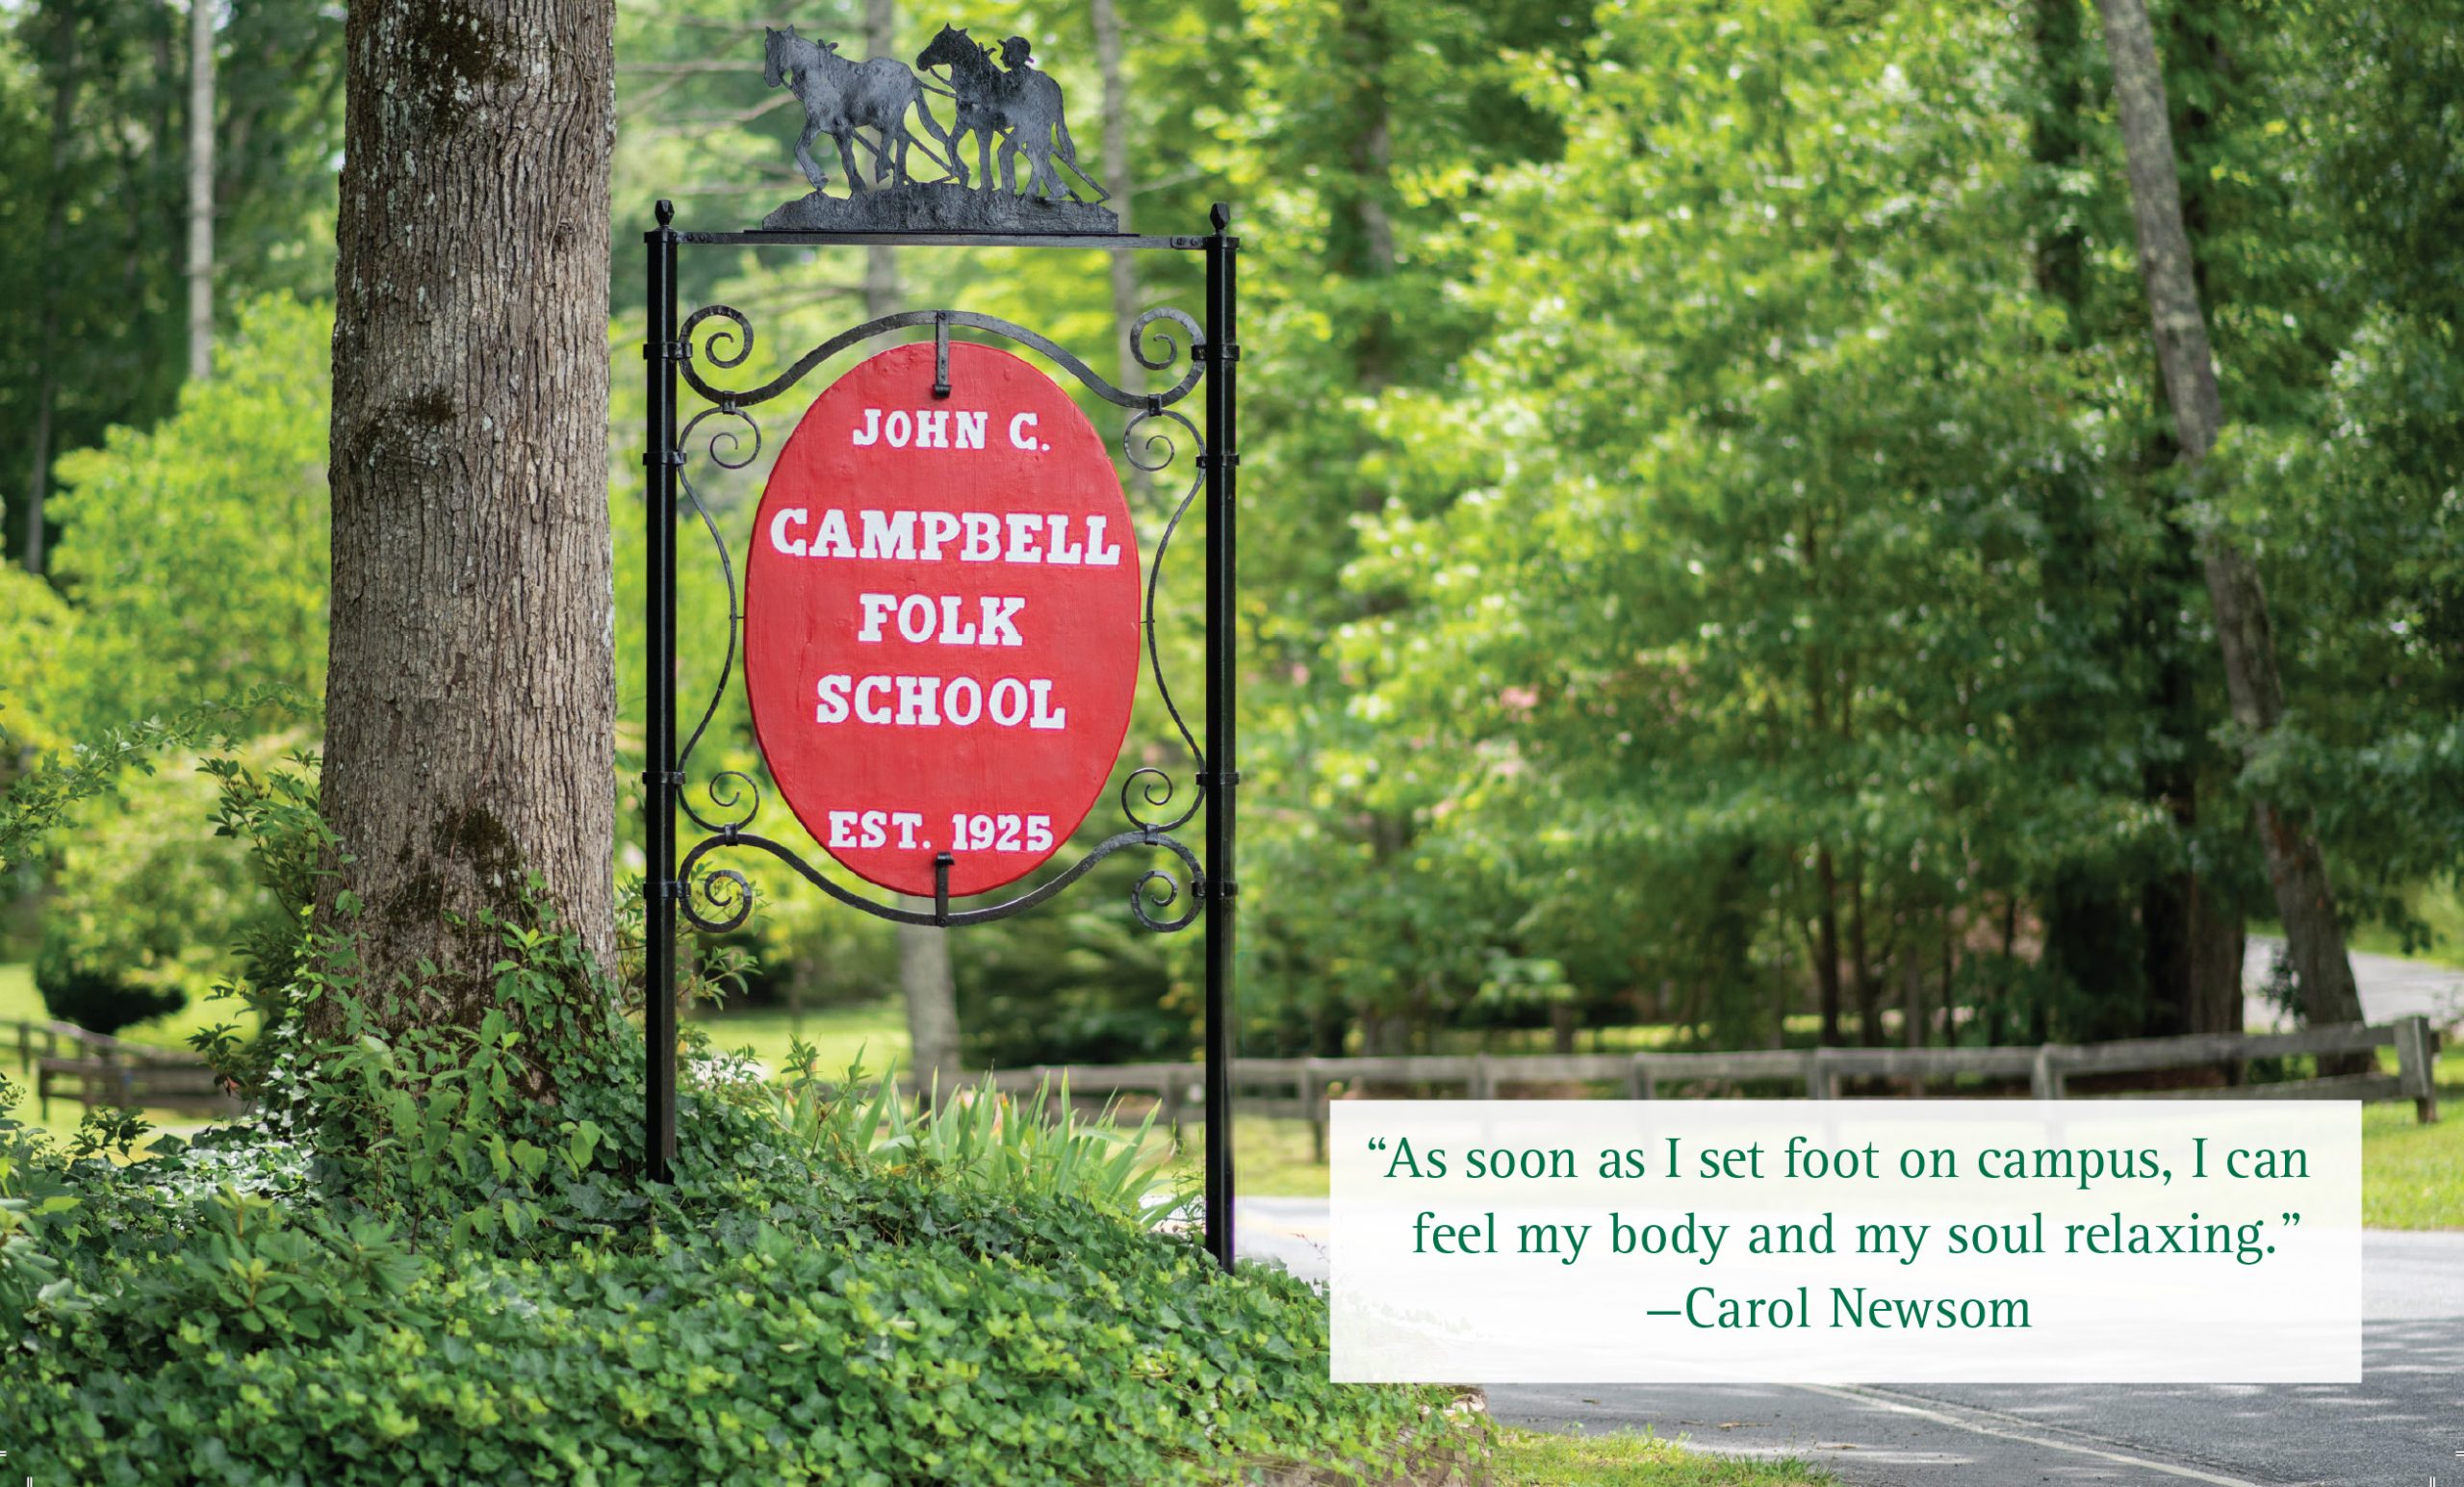 The Folk School's entrance sign with a quote by student and donor Carol Newsom